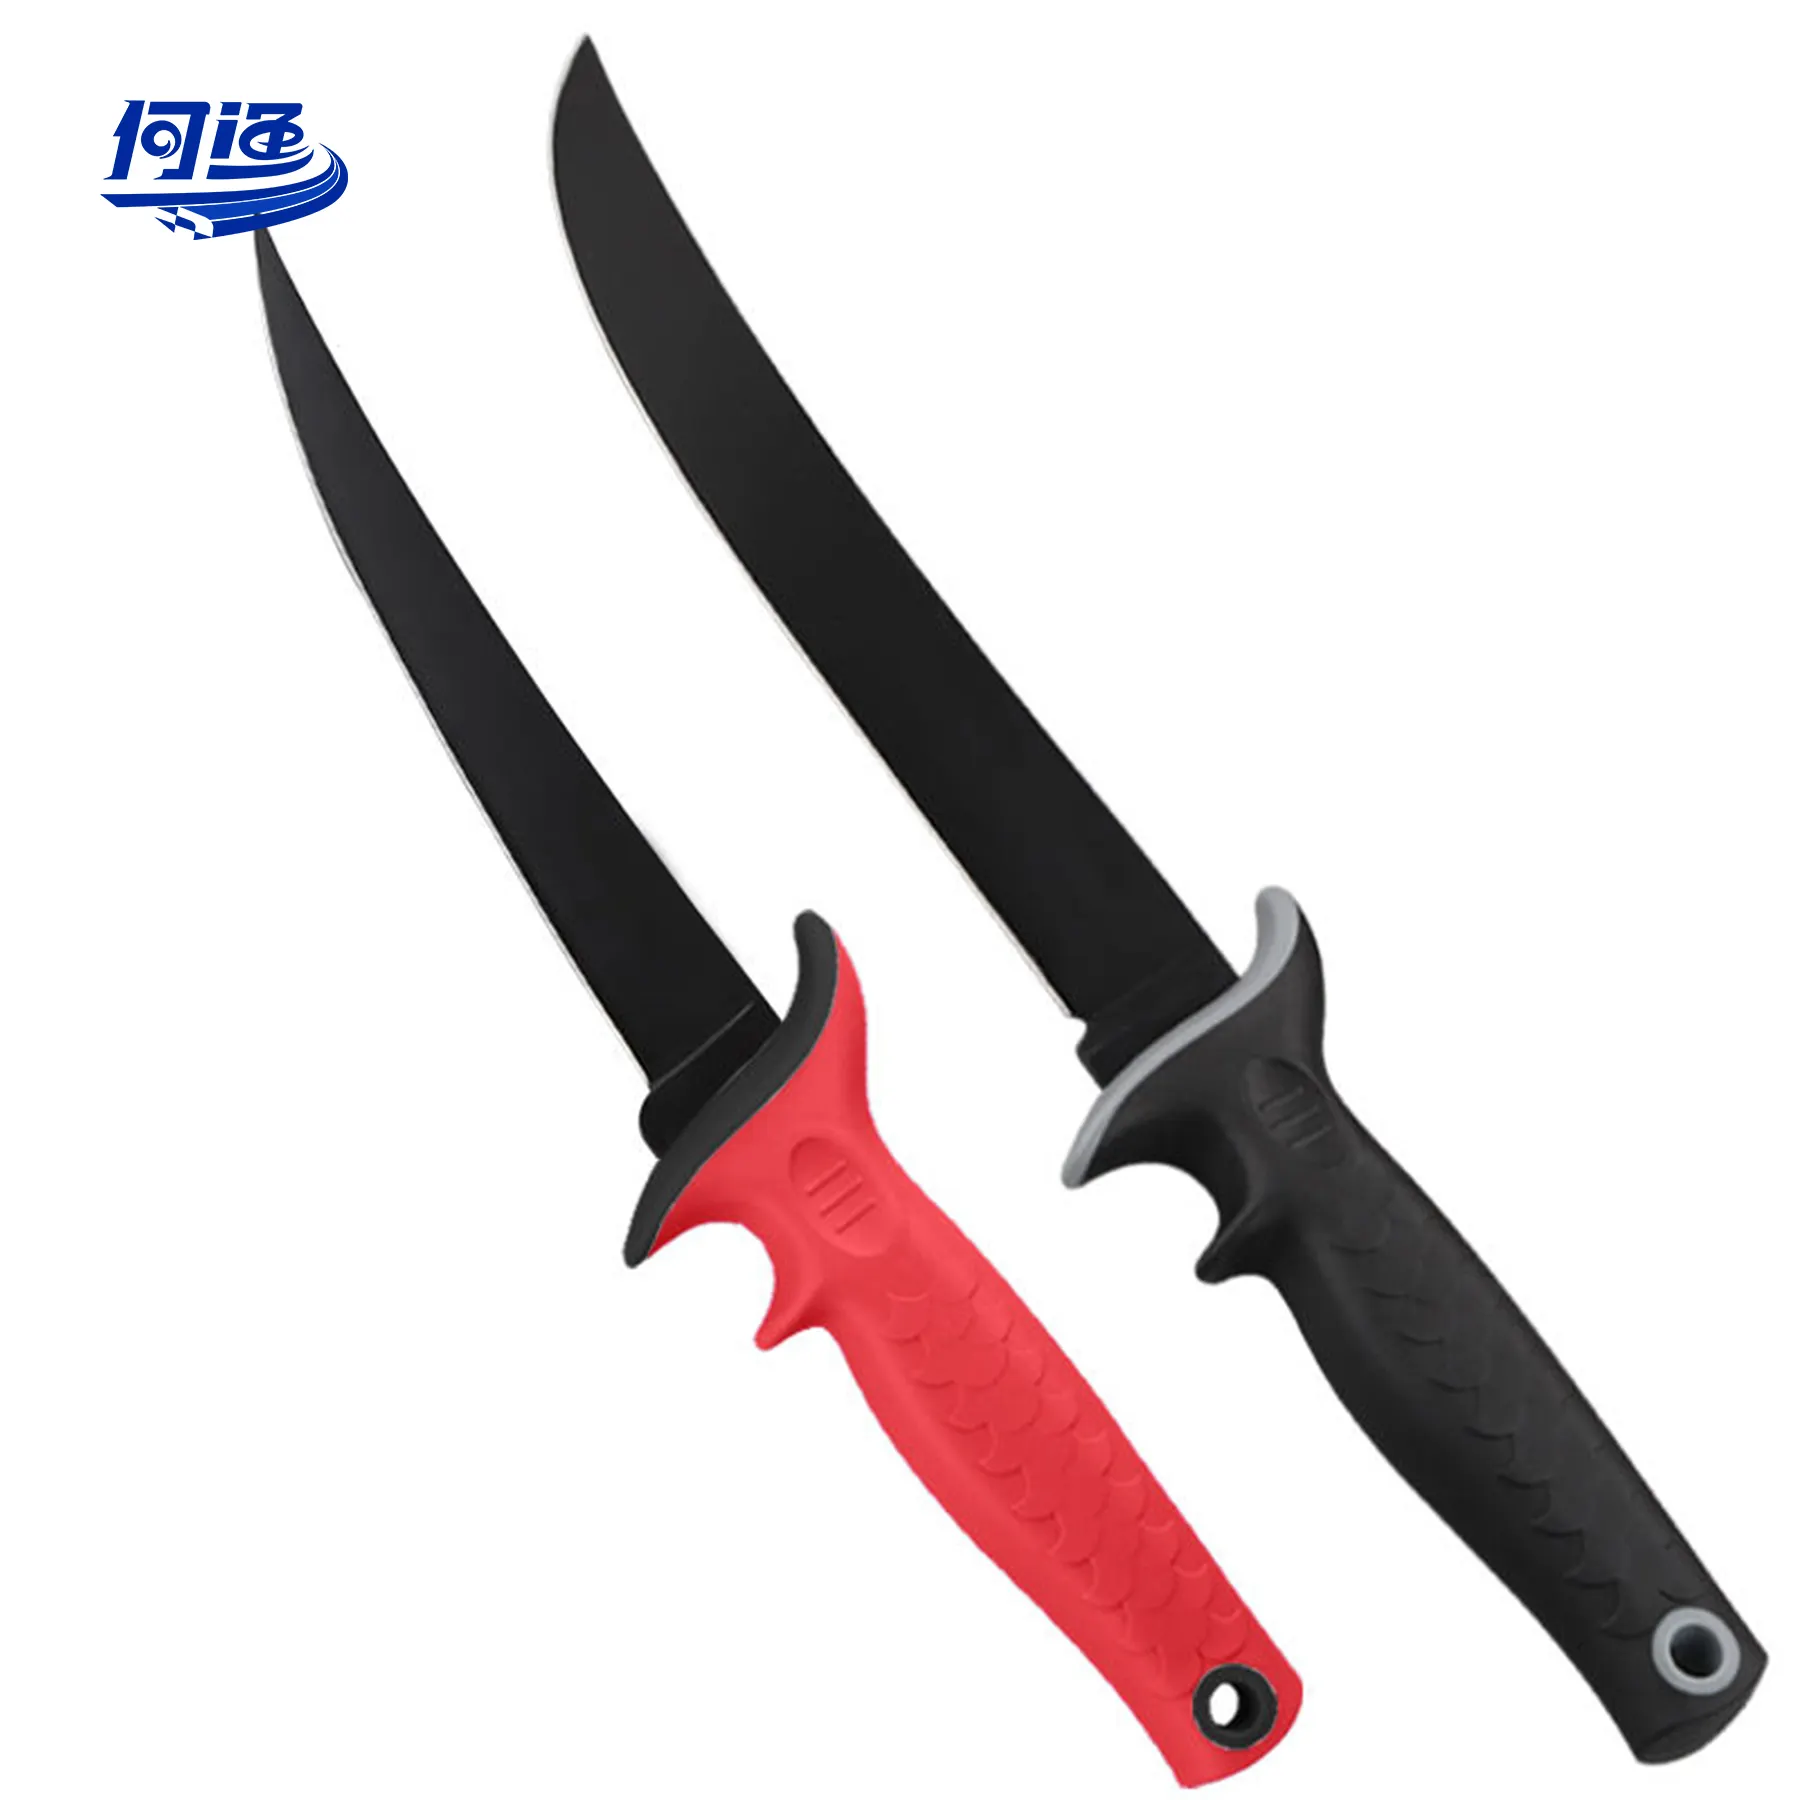 Customized 5cr15mov Stainless Steel 7inch 9inch Serrated Flex Fishing Fillet Knife Black Red Filet Fishing Knife